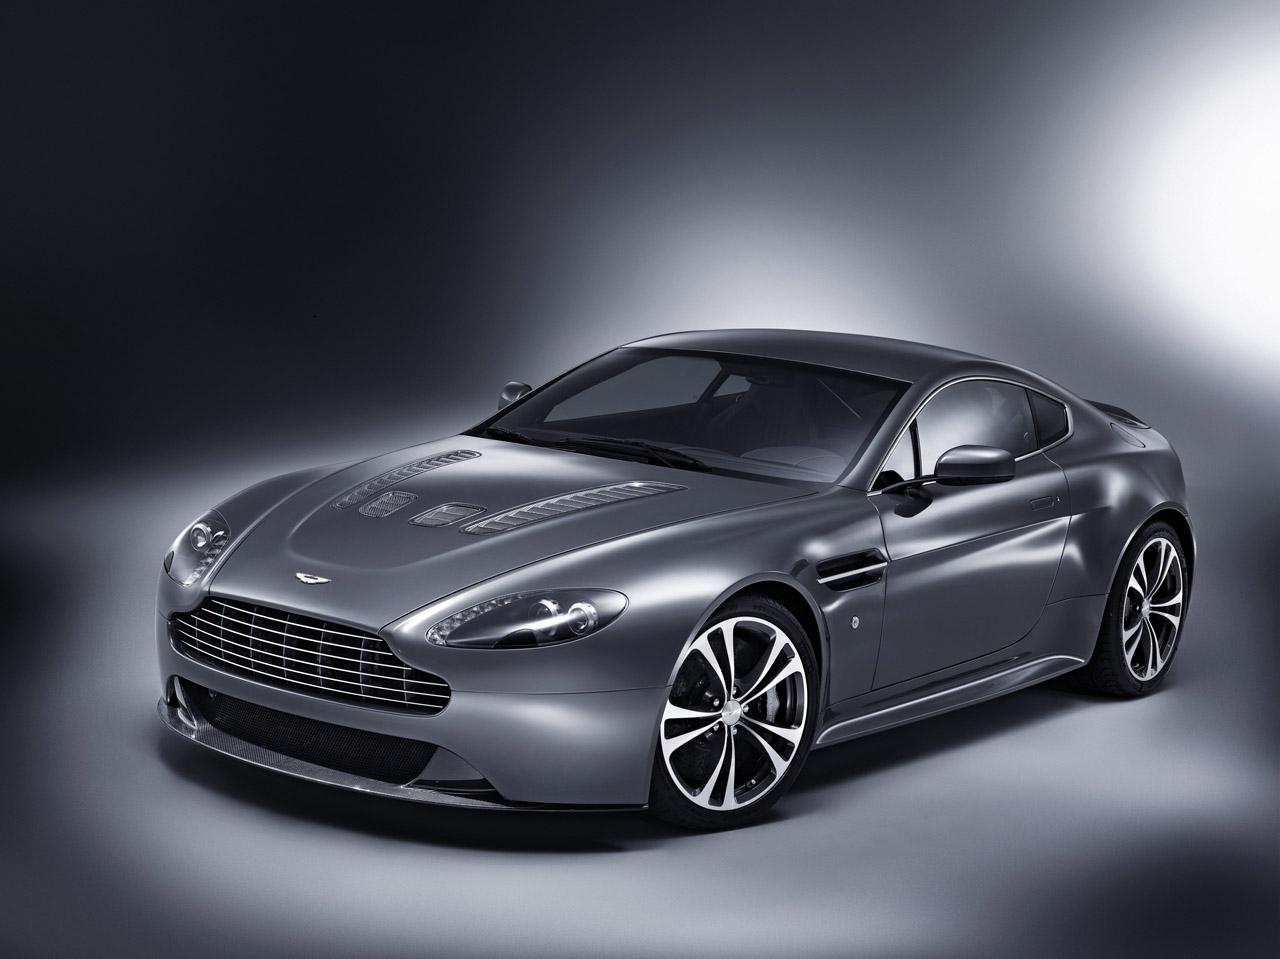 UK Auto Cars: Free Download Cars New Desktop Wallpapers 2012